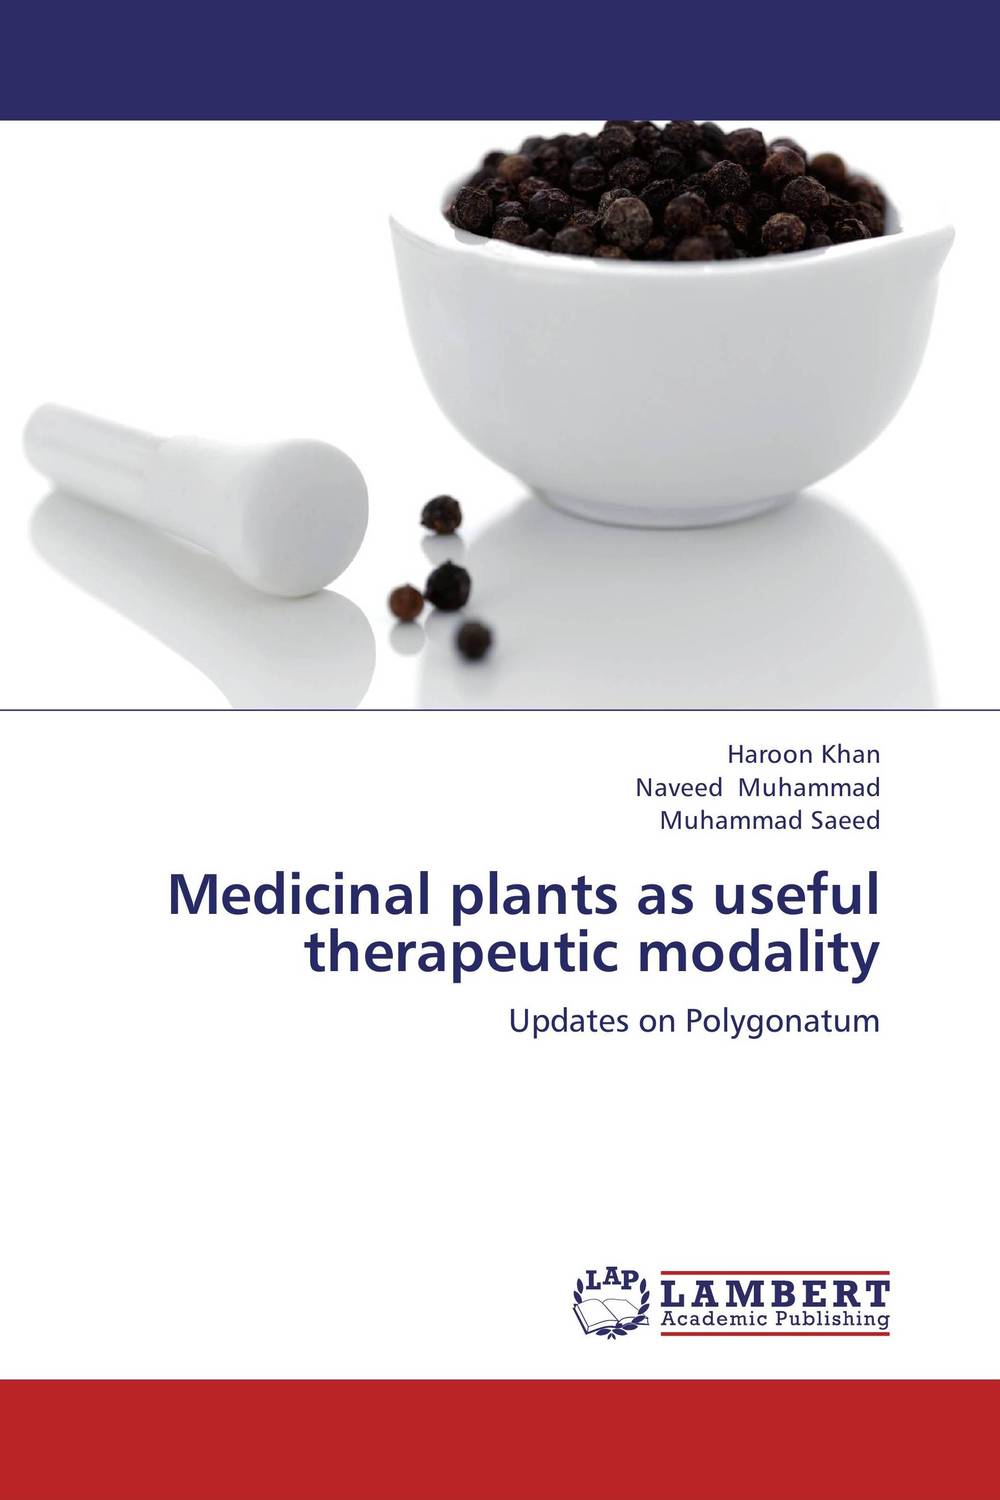 Medicinal plants as useful therapeutic modality